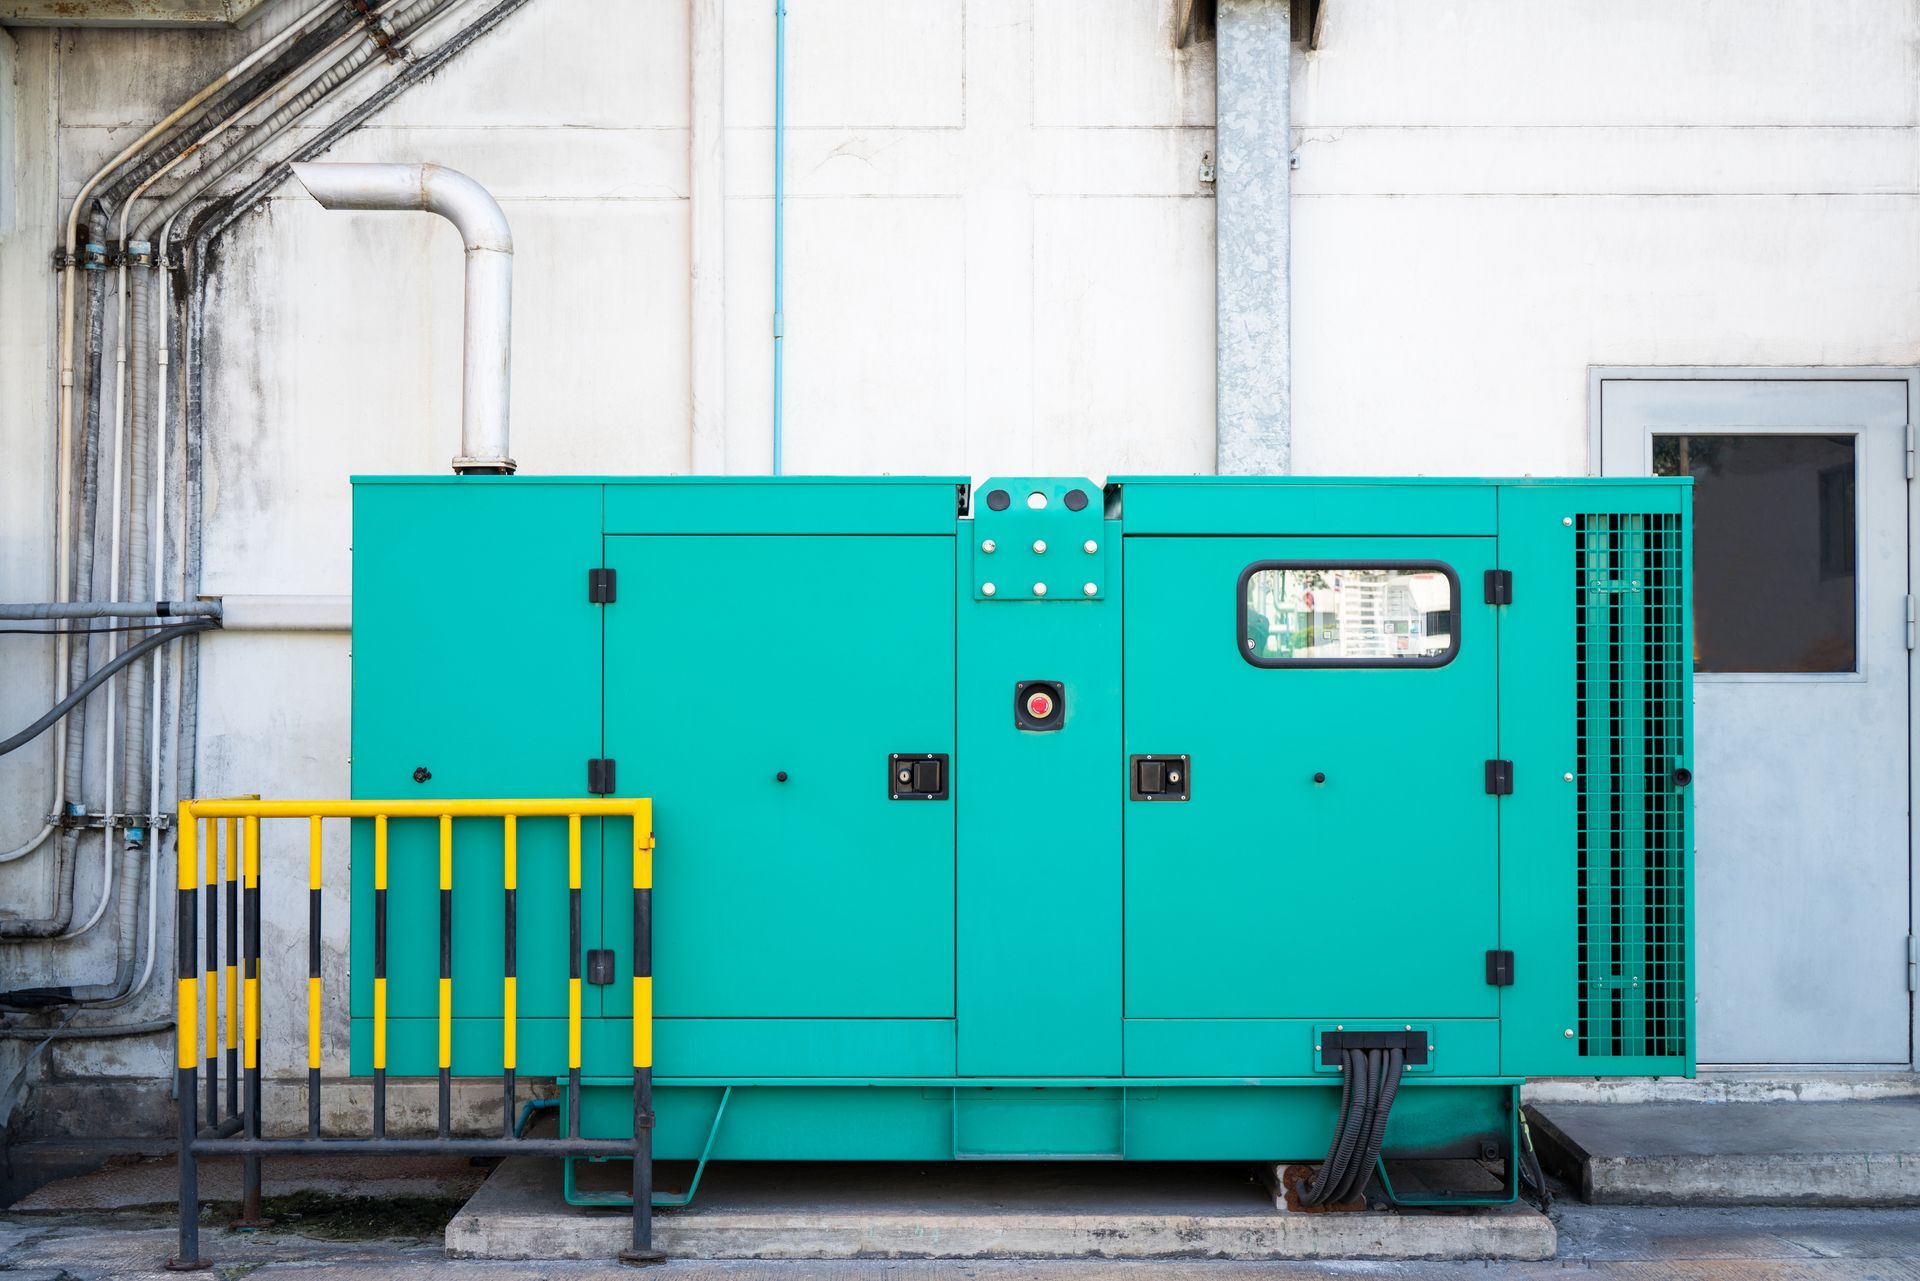 A large green generator is parked in front of a building.